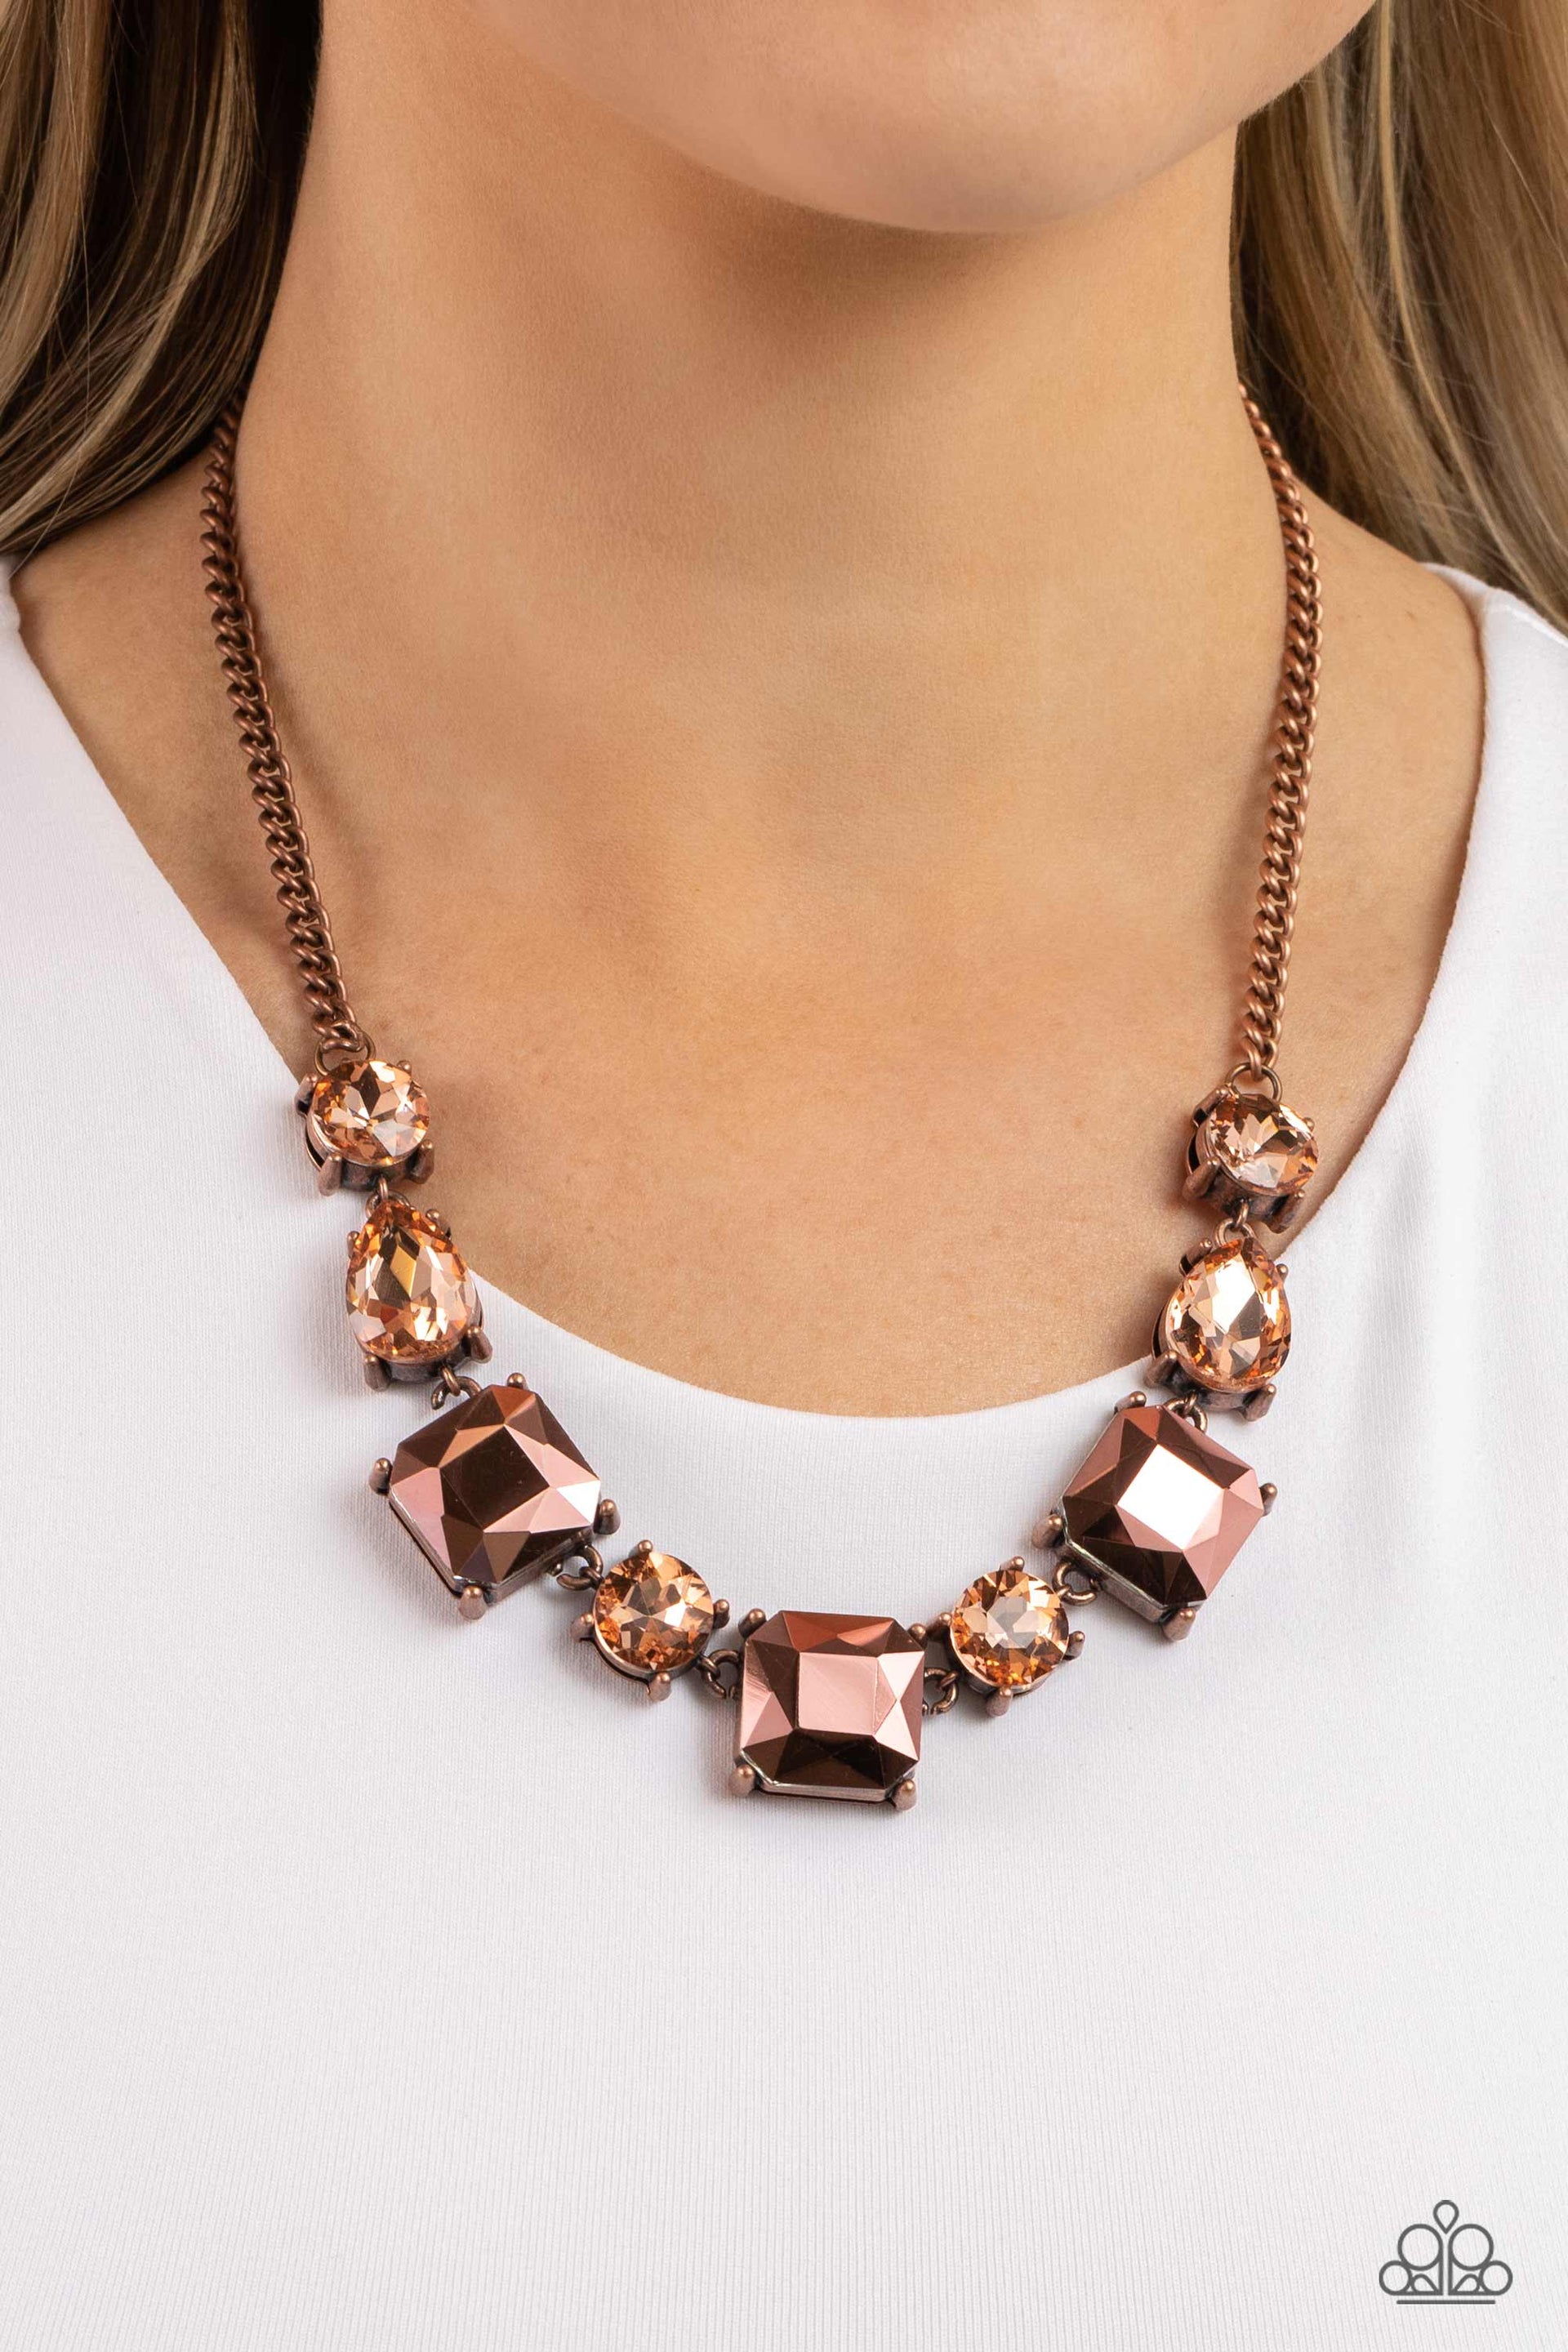 Paparazzi Jewelry Industrial Intensity - Copper Necklace Bling – Bling by  JessieK